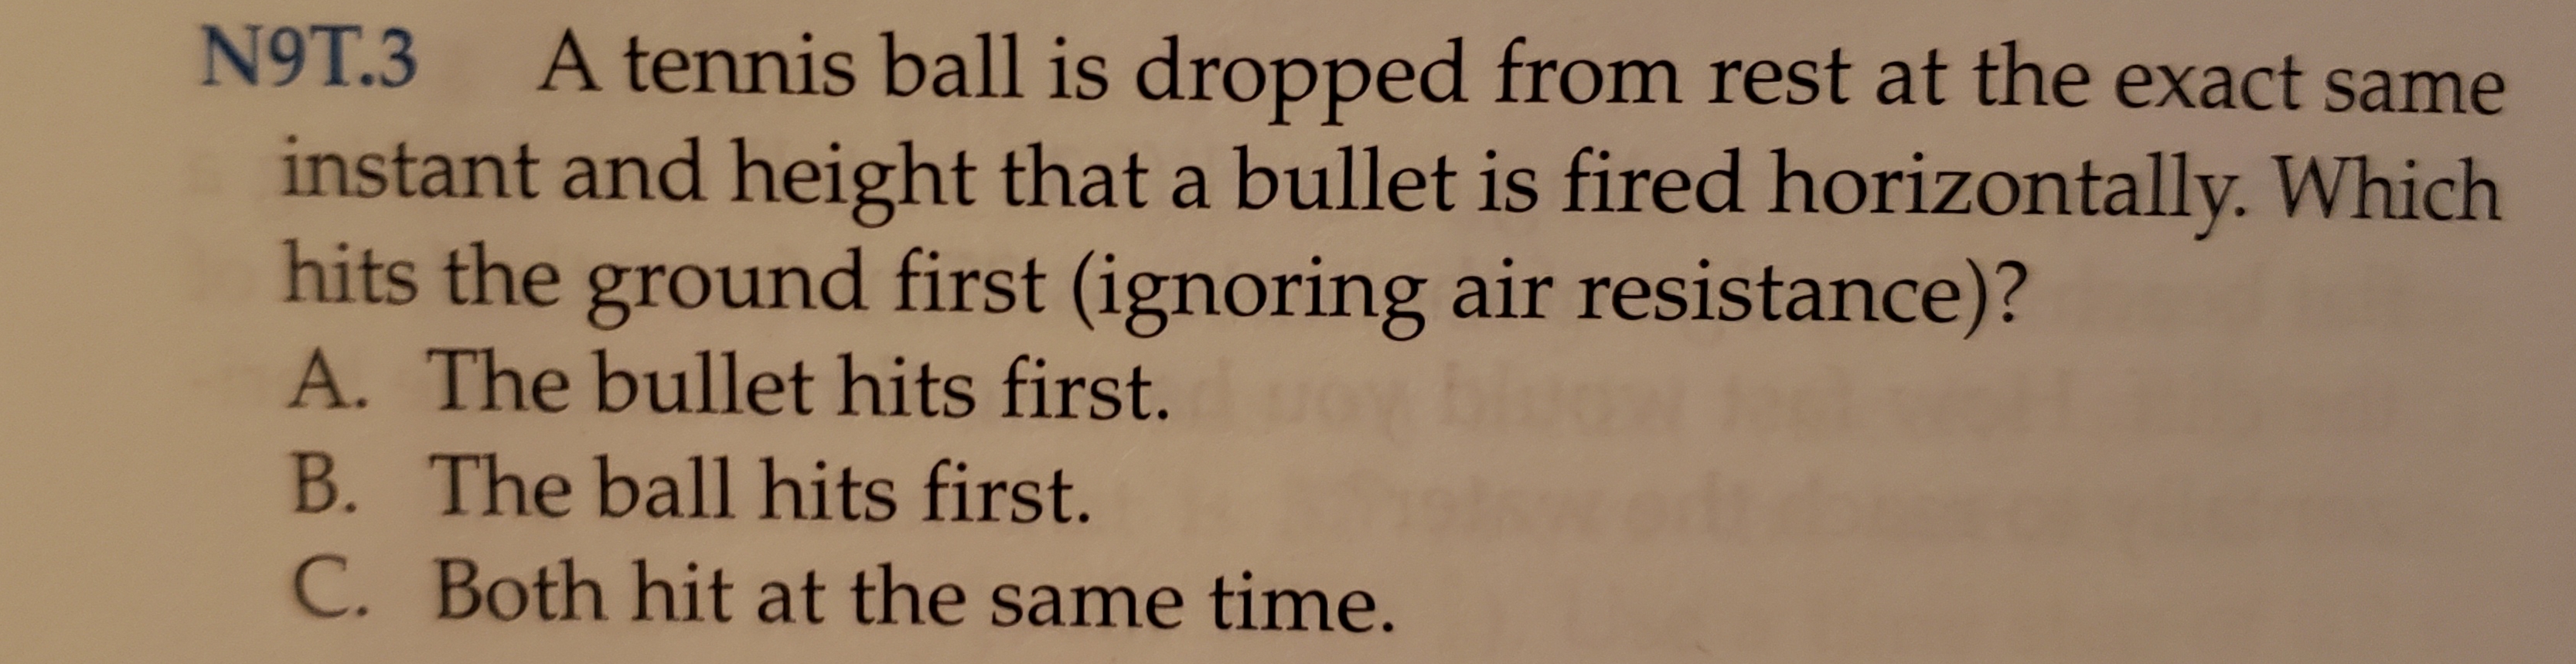 9T.3
A tennis ball is dropped from rest at the exact same
instant and height that a bullet is fired horizontally. Which
hits the ground first (ignoring air resistance)?
A. The bullet hits first.
B. The ball hits first.
C. Both hit at the same time.
